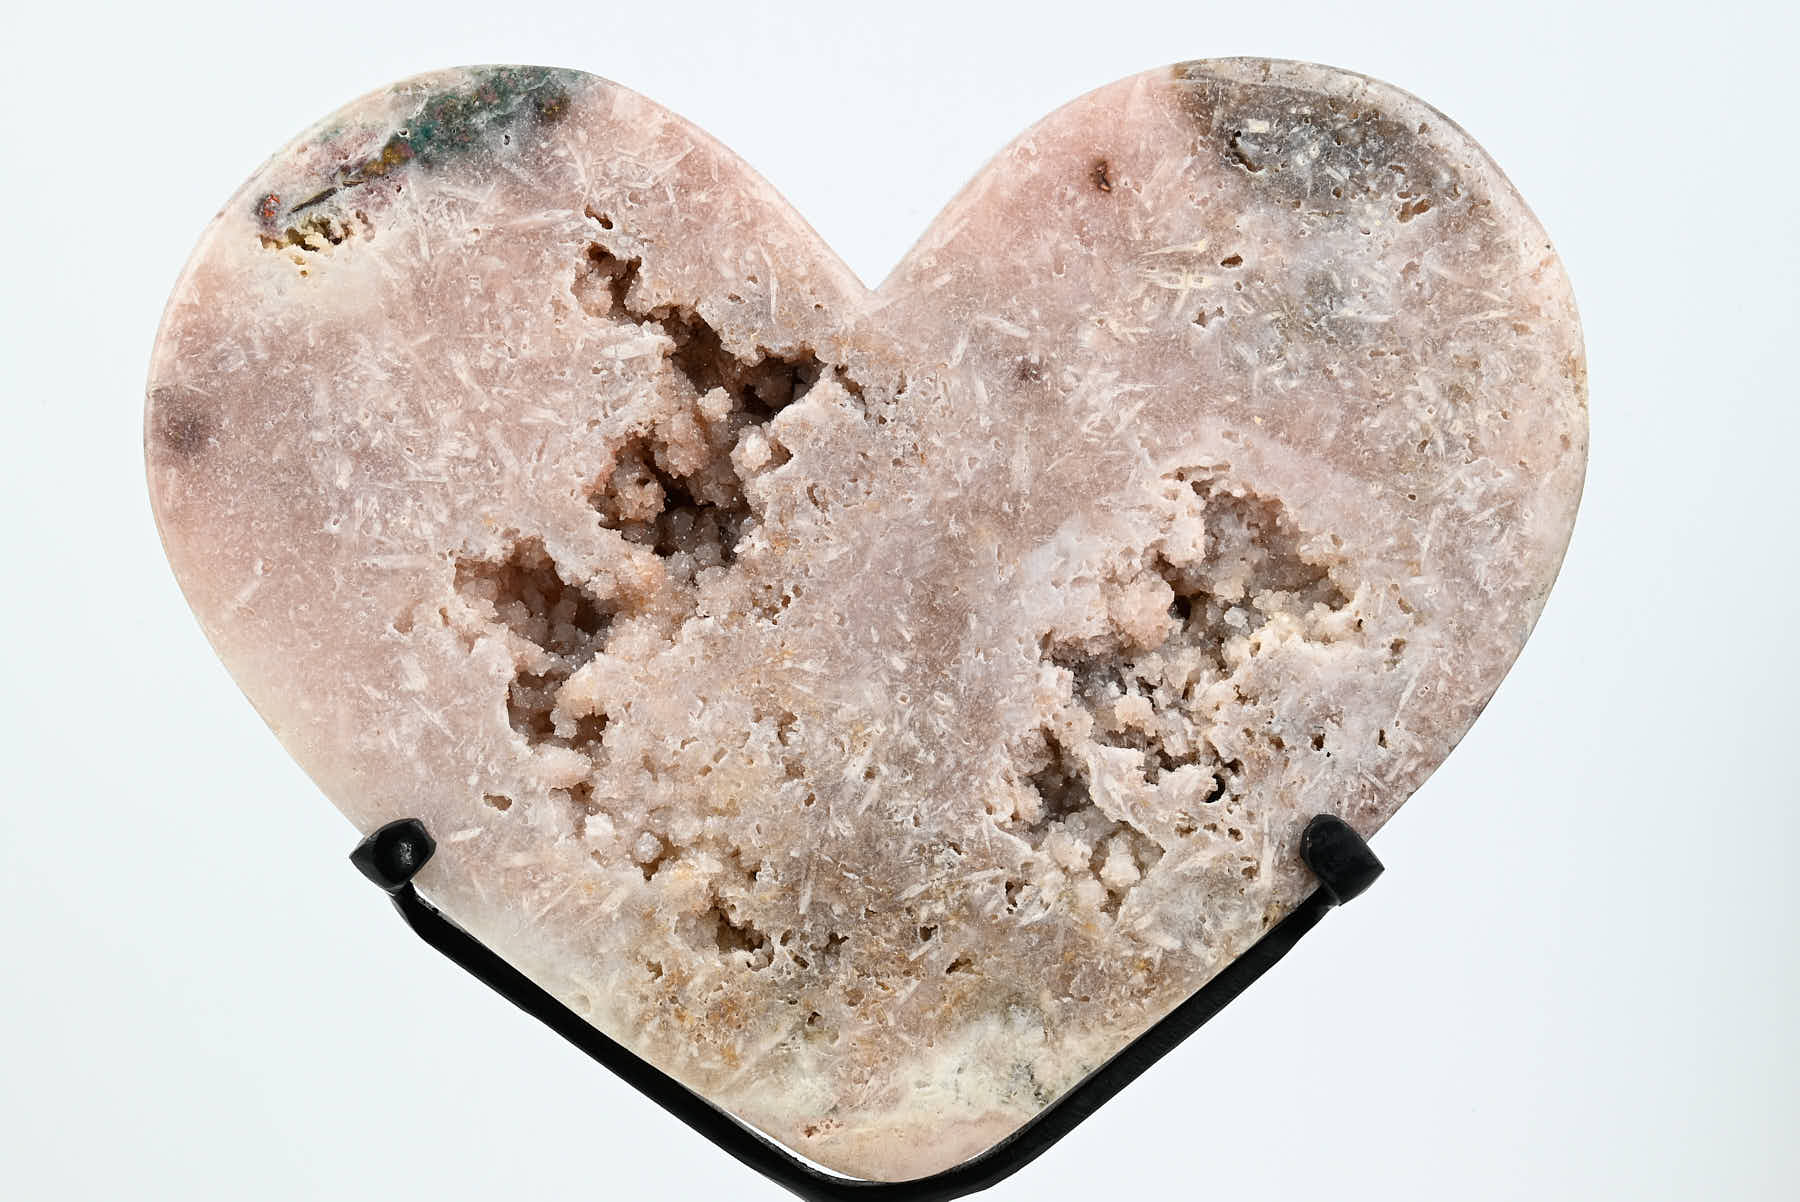 Extra Quality Pink Amethyst Heart - 2.21kg, 24cm high - #HTPINK-34026